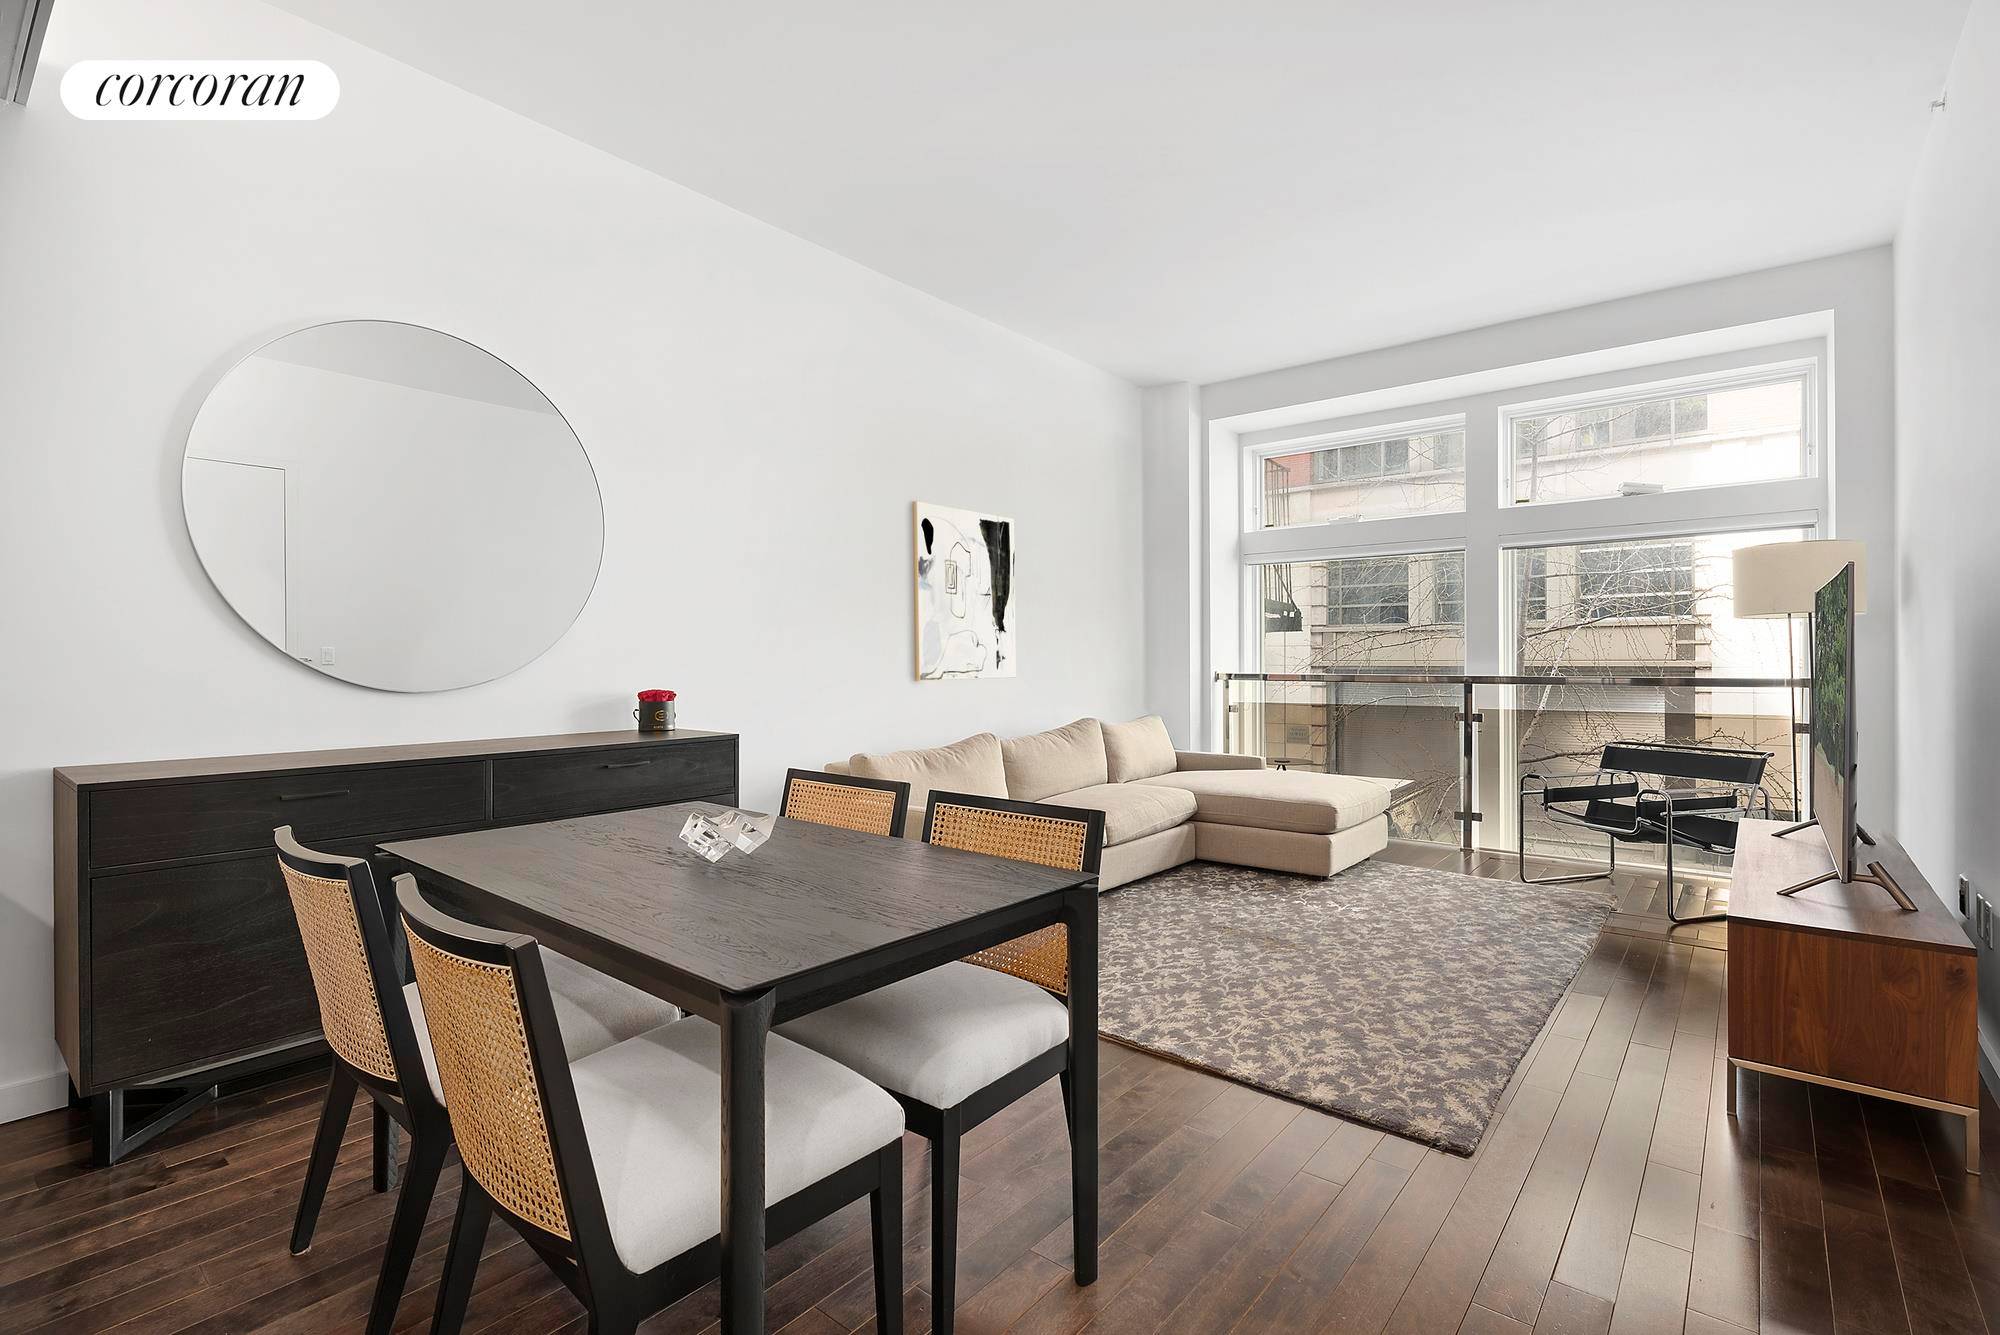 Gorgeous designer interiors, private outdoor space and treetop views await in this exquisite two bedroom plus home office contemporary brownstone condominium in the heart of the Flatiron District.